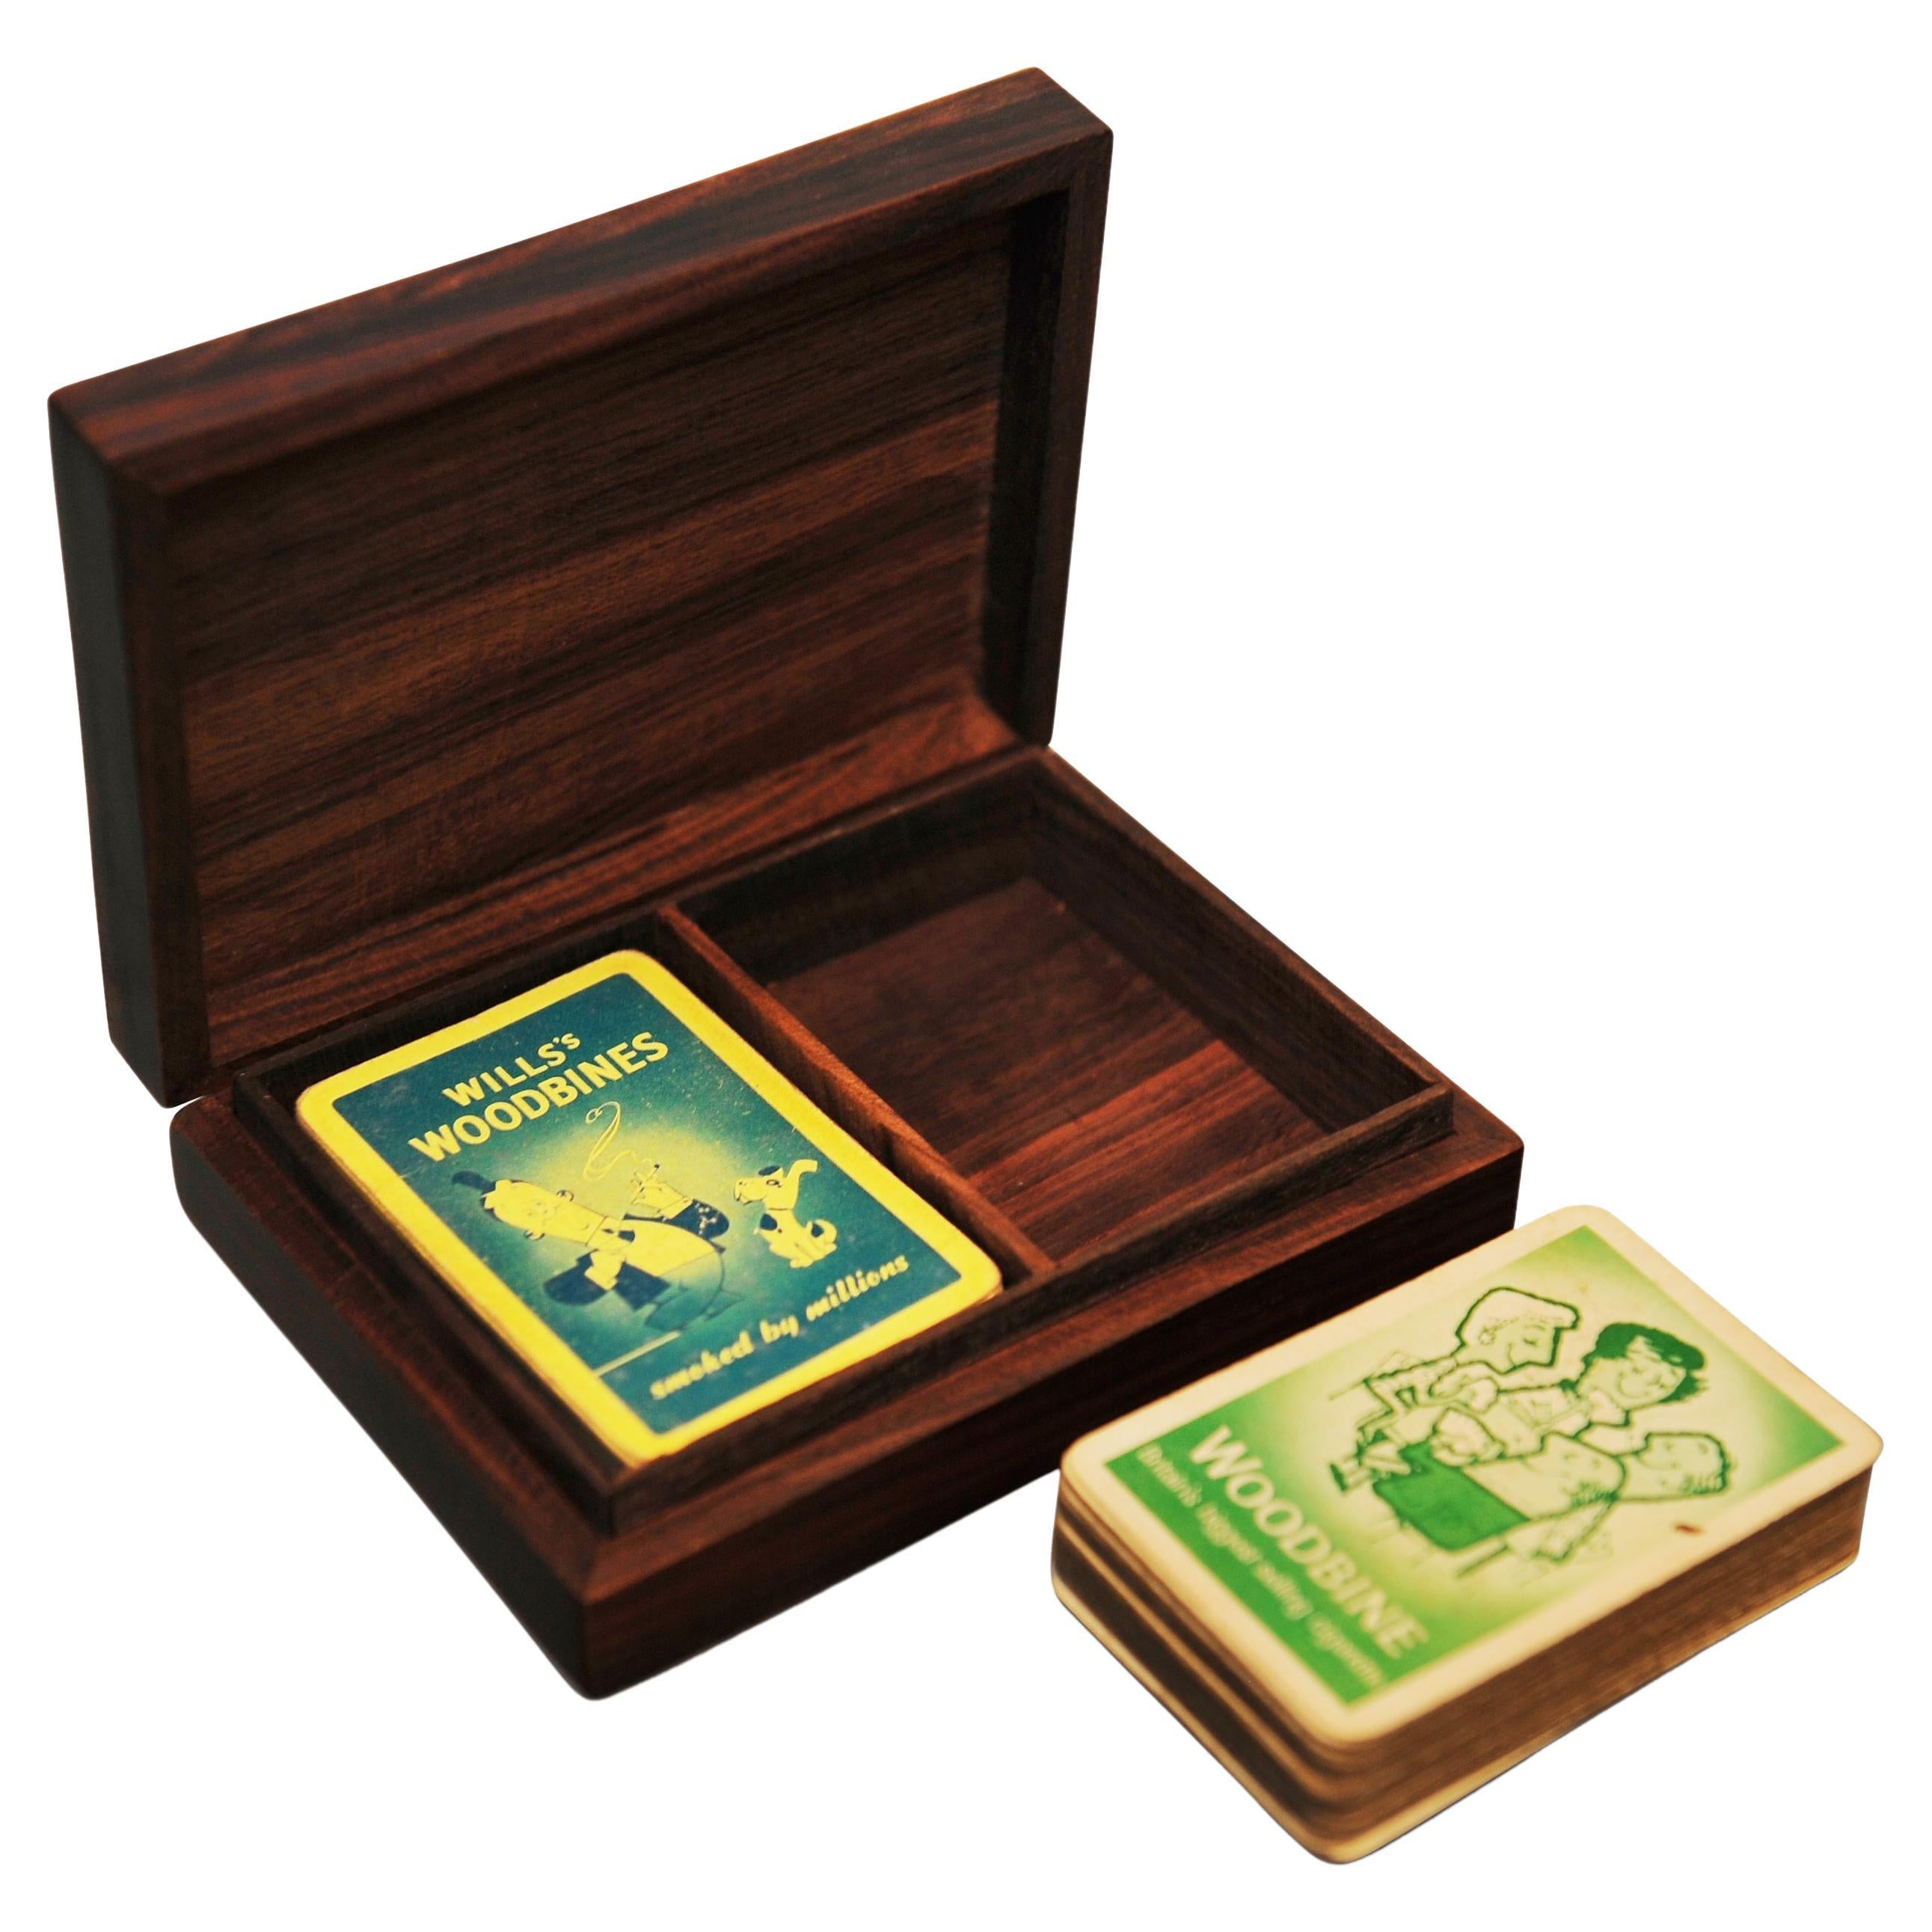 1930's Art Deco Ace of Spades Boxed Set Complete With Will's Woodbine's Cards.

Great gift for the avid card player, or games fan.
Dimensions are guesstimates. 

Woodbine was launched in 1888 by W.D. & H.O. Wills. Noted for its strong unfiltered